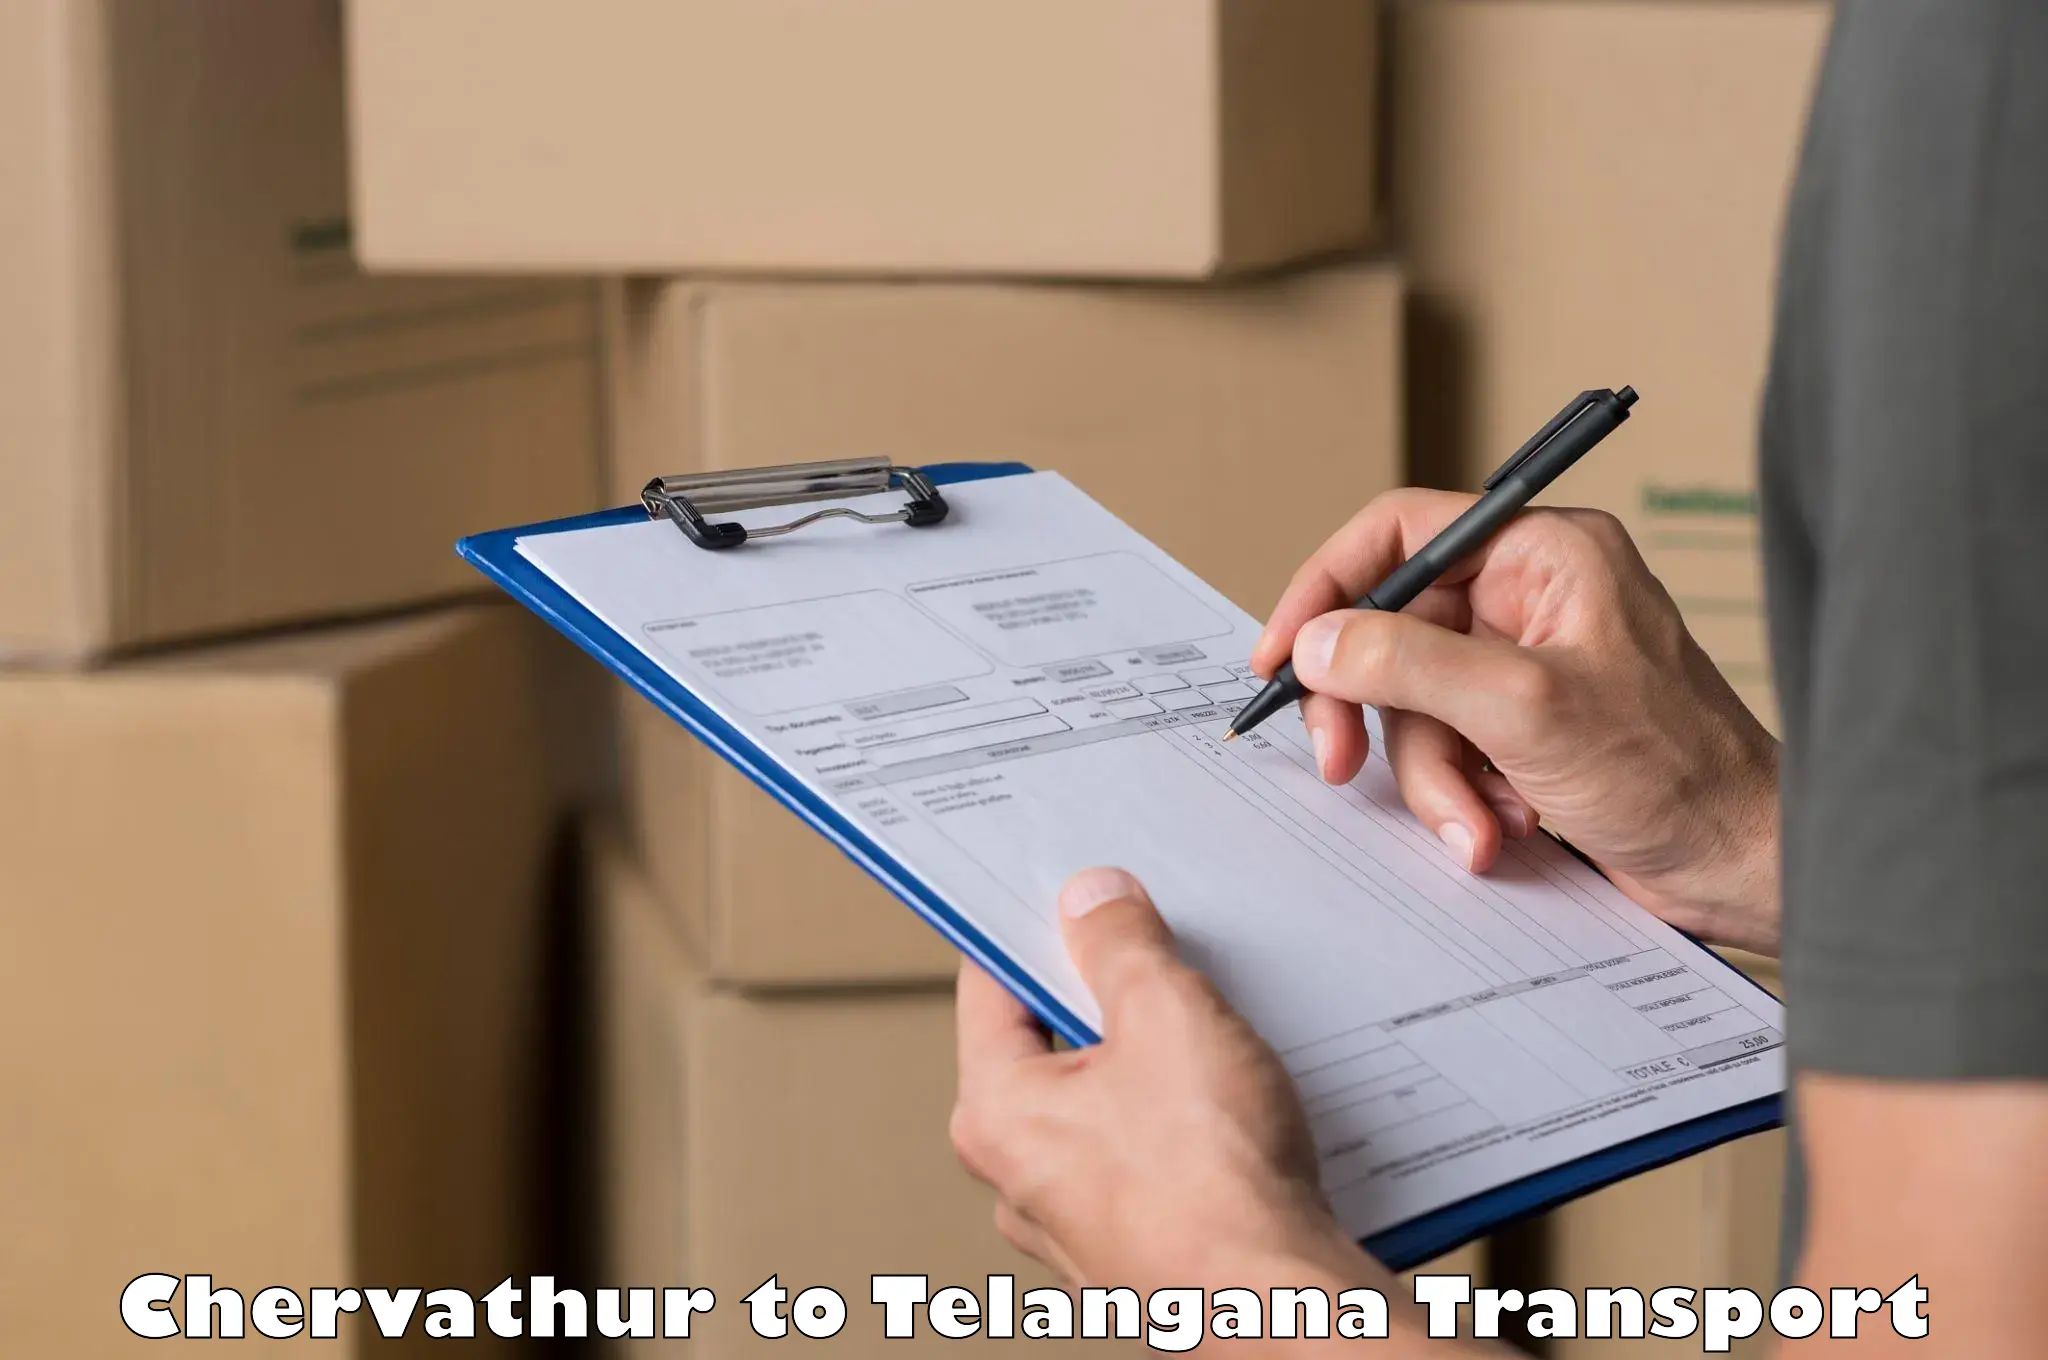 Goods delivery service in Chervathur to Yellareddy